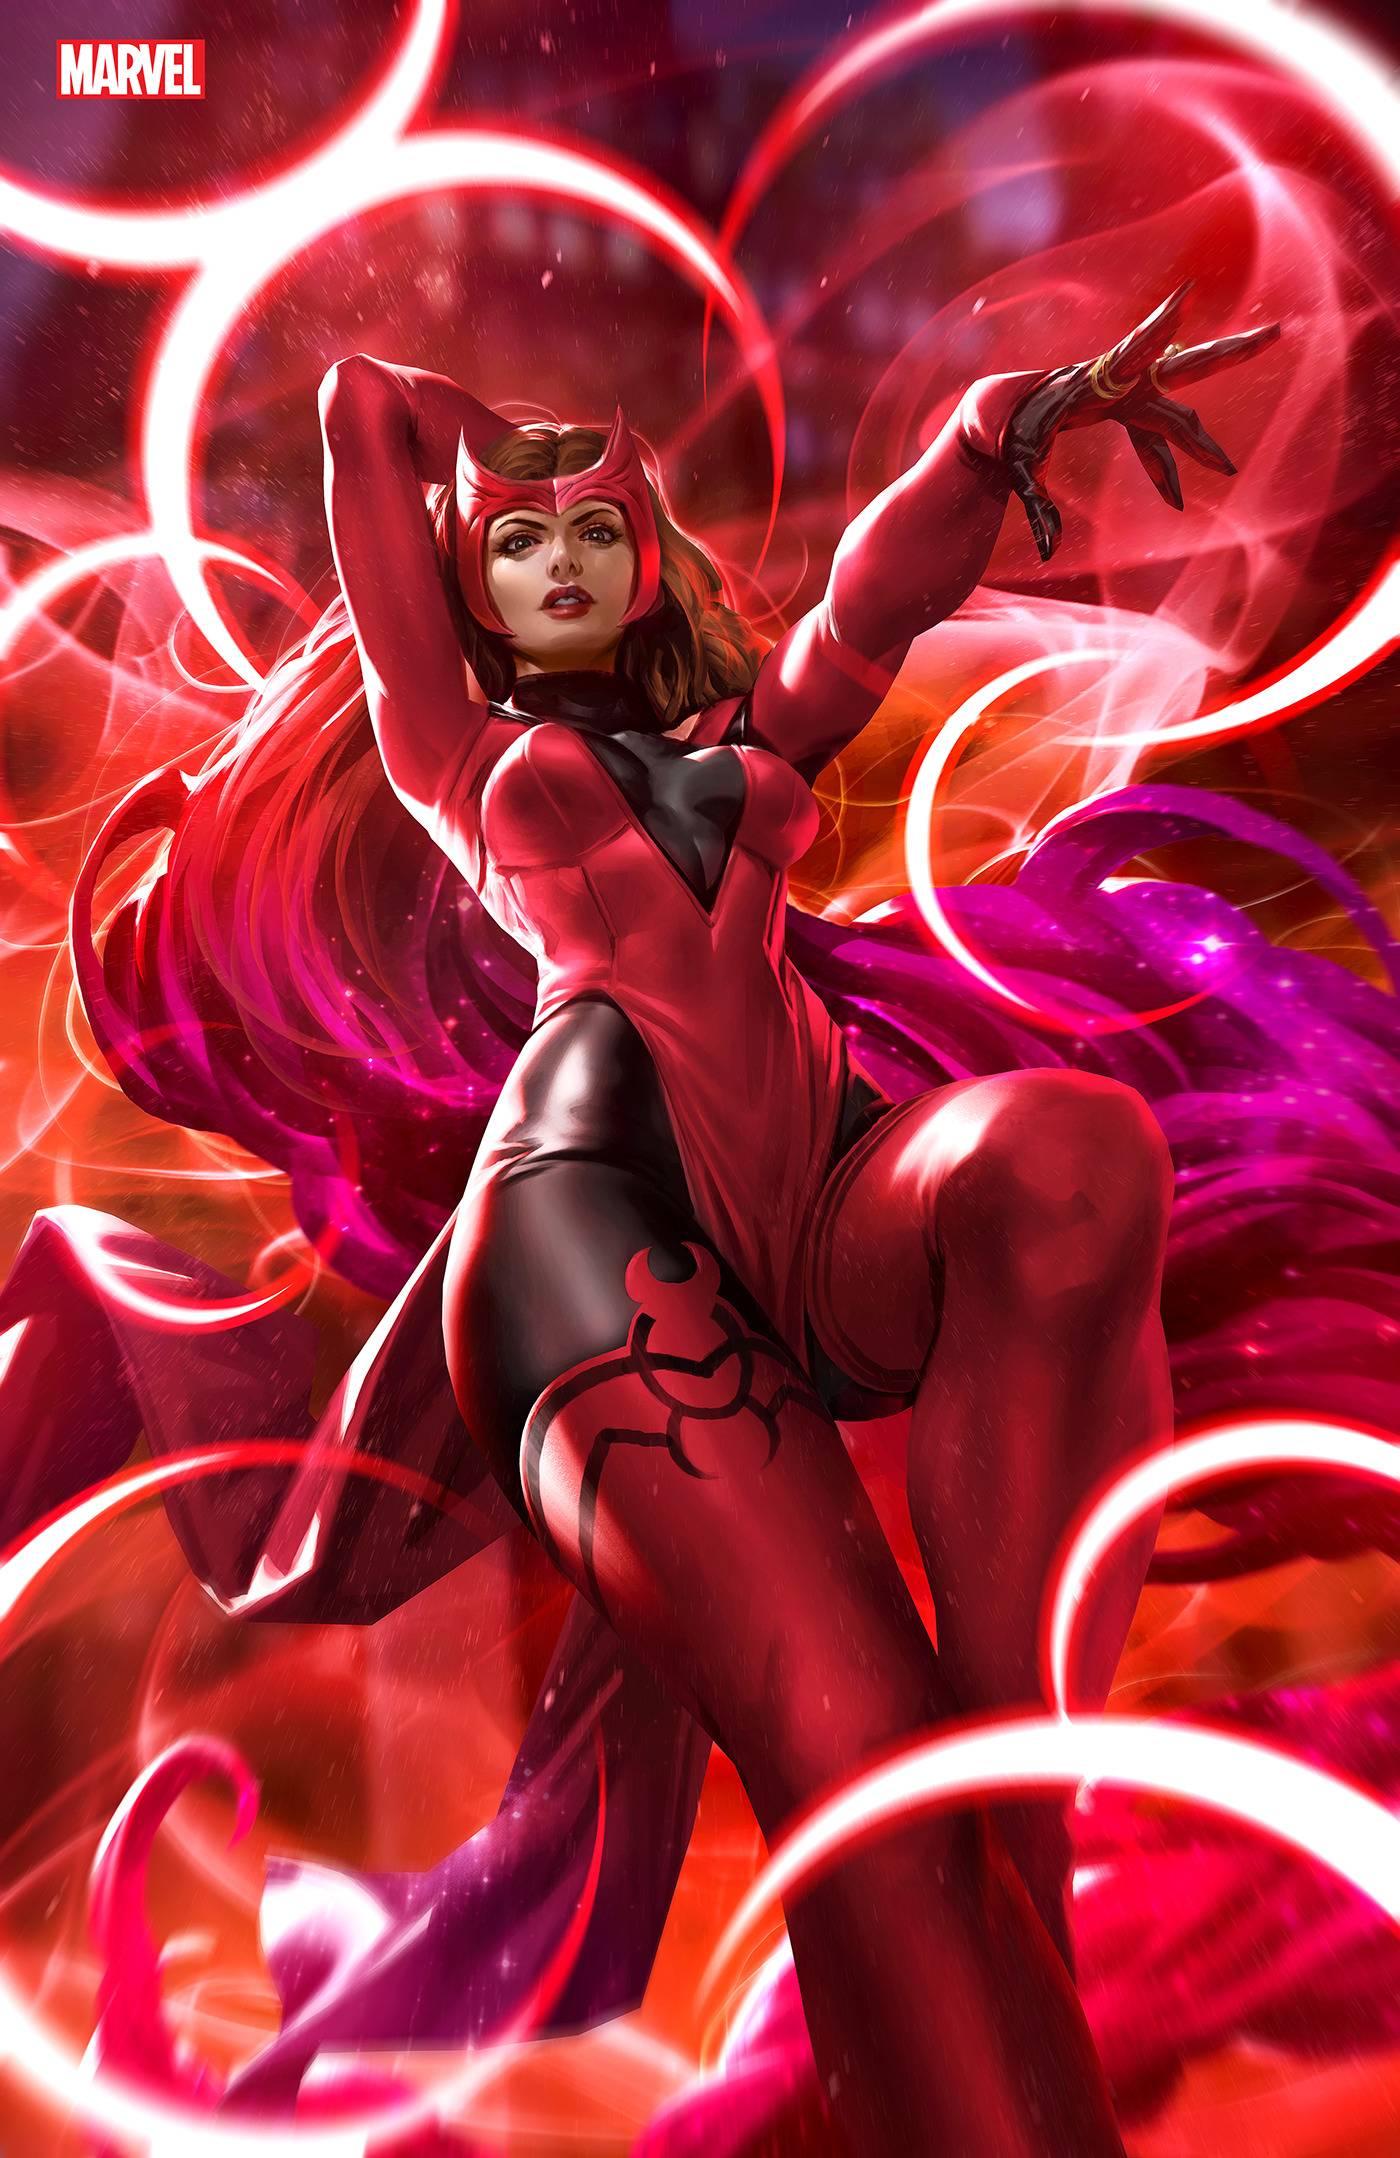 AVENGERS #1 1:50 COPY INCV CHEW SCARLET WITCH VIRGIN